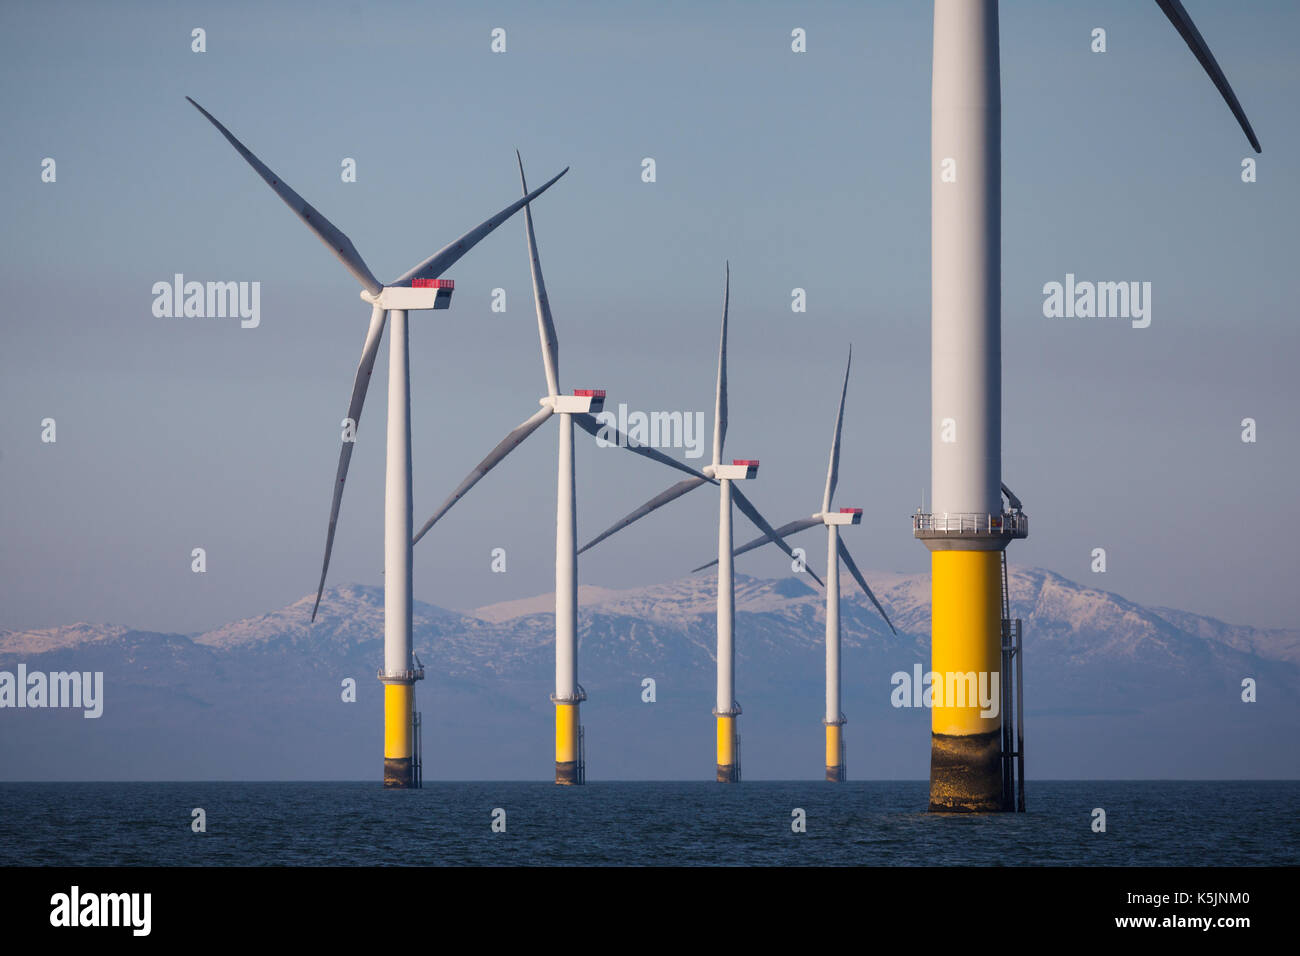 Wind turbines of Walney & West of Duddon Sands Offshore Wind Farm with snow-capped hills of the Lake District in the background Stock Photo